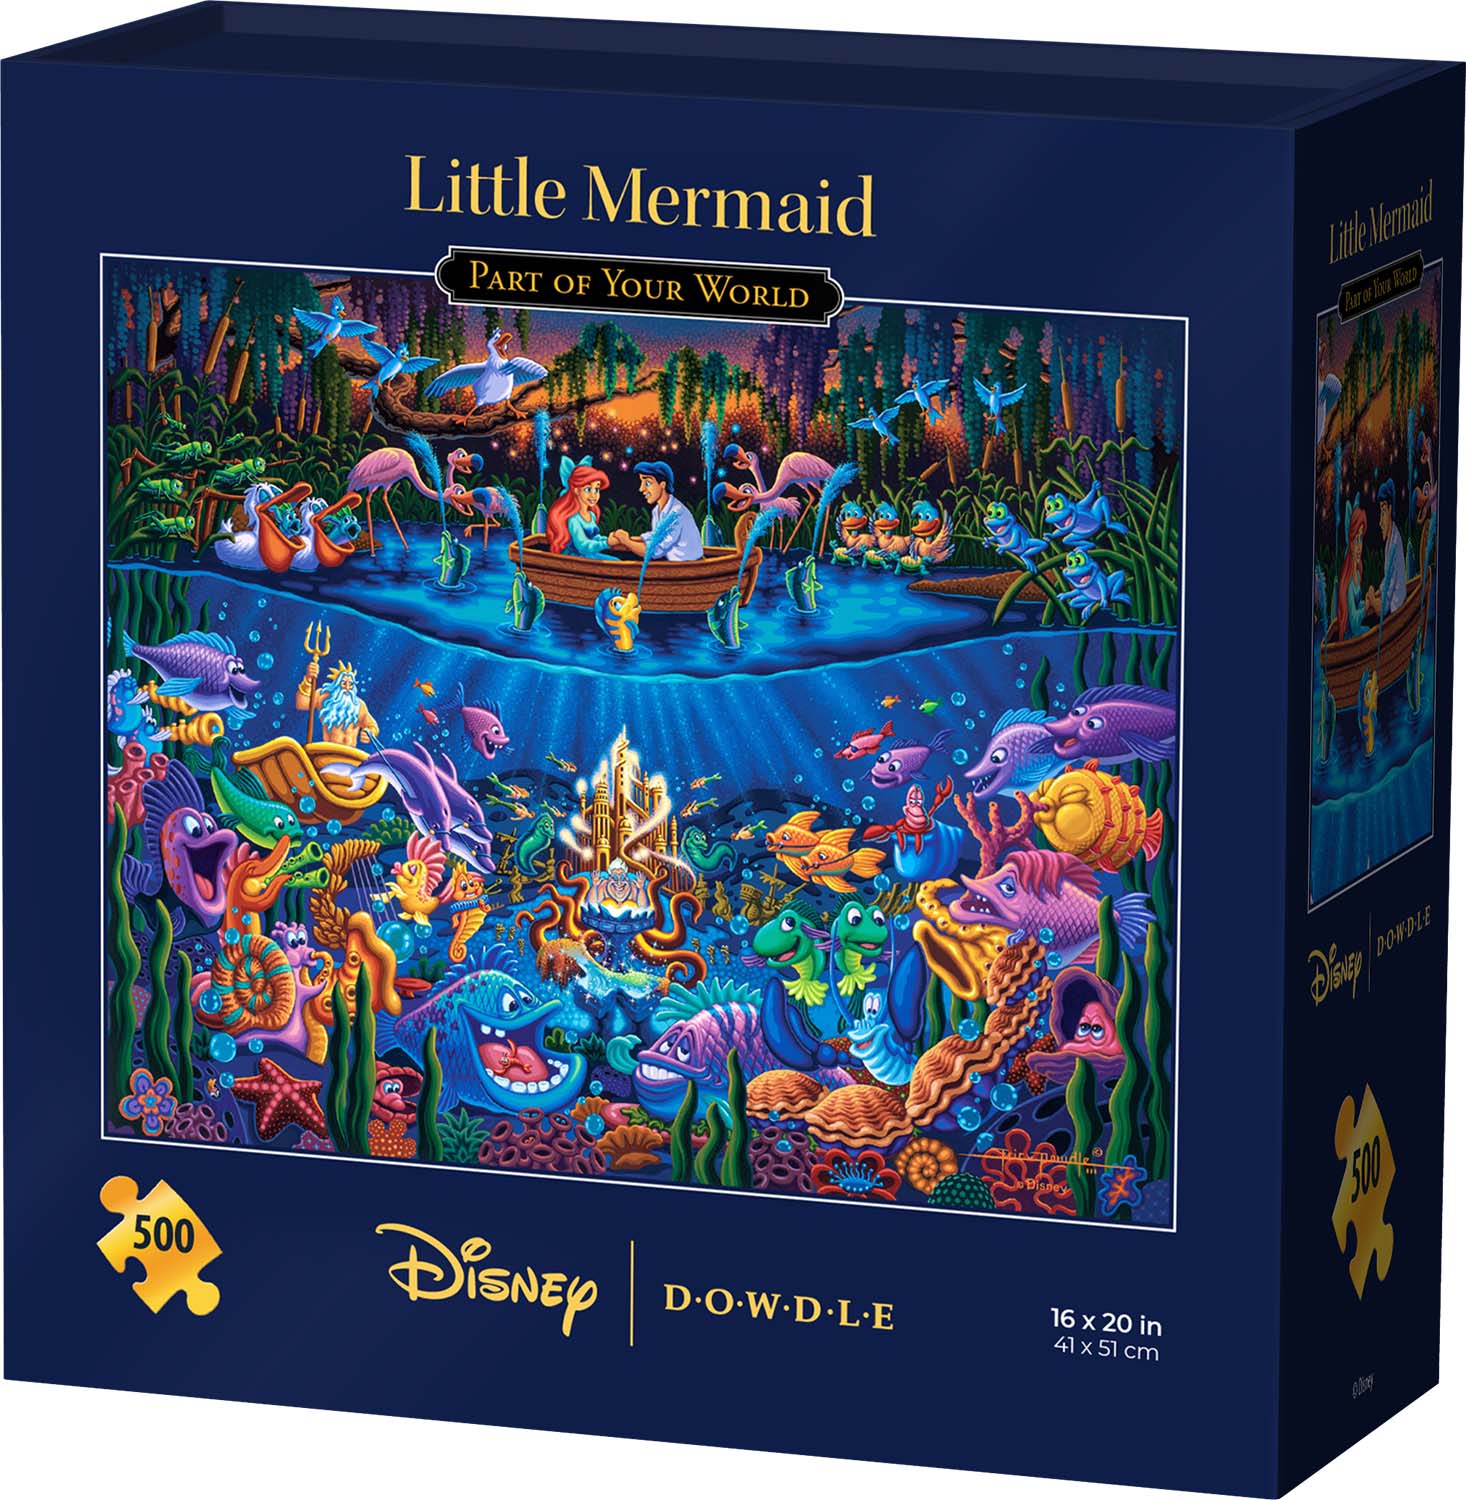 The Little Mermaid Part of Your World, 500 Pieces, Dowdle Folk Art